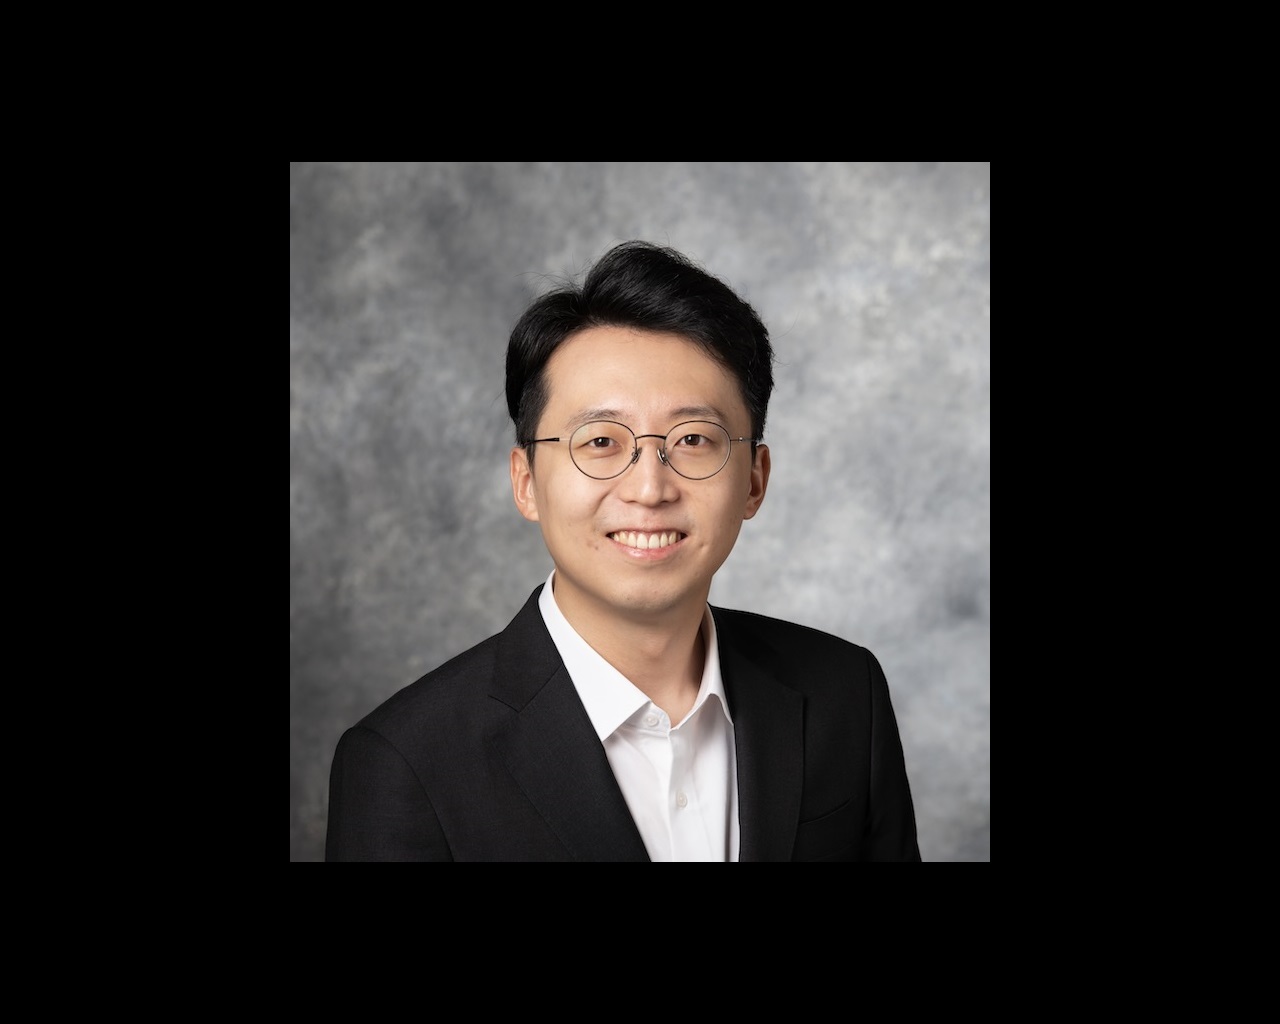 A headshot of Eojin Han, a member of the Lyle School of Engineering Faculty.